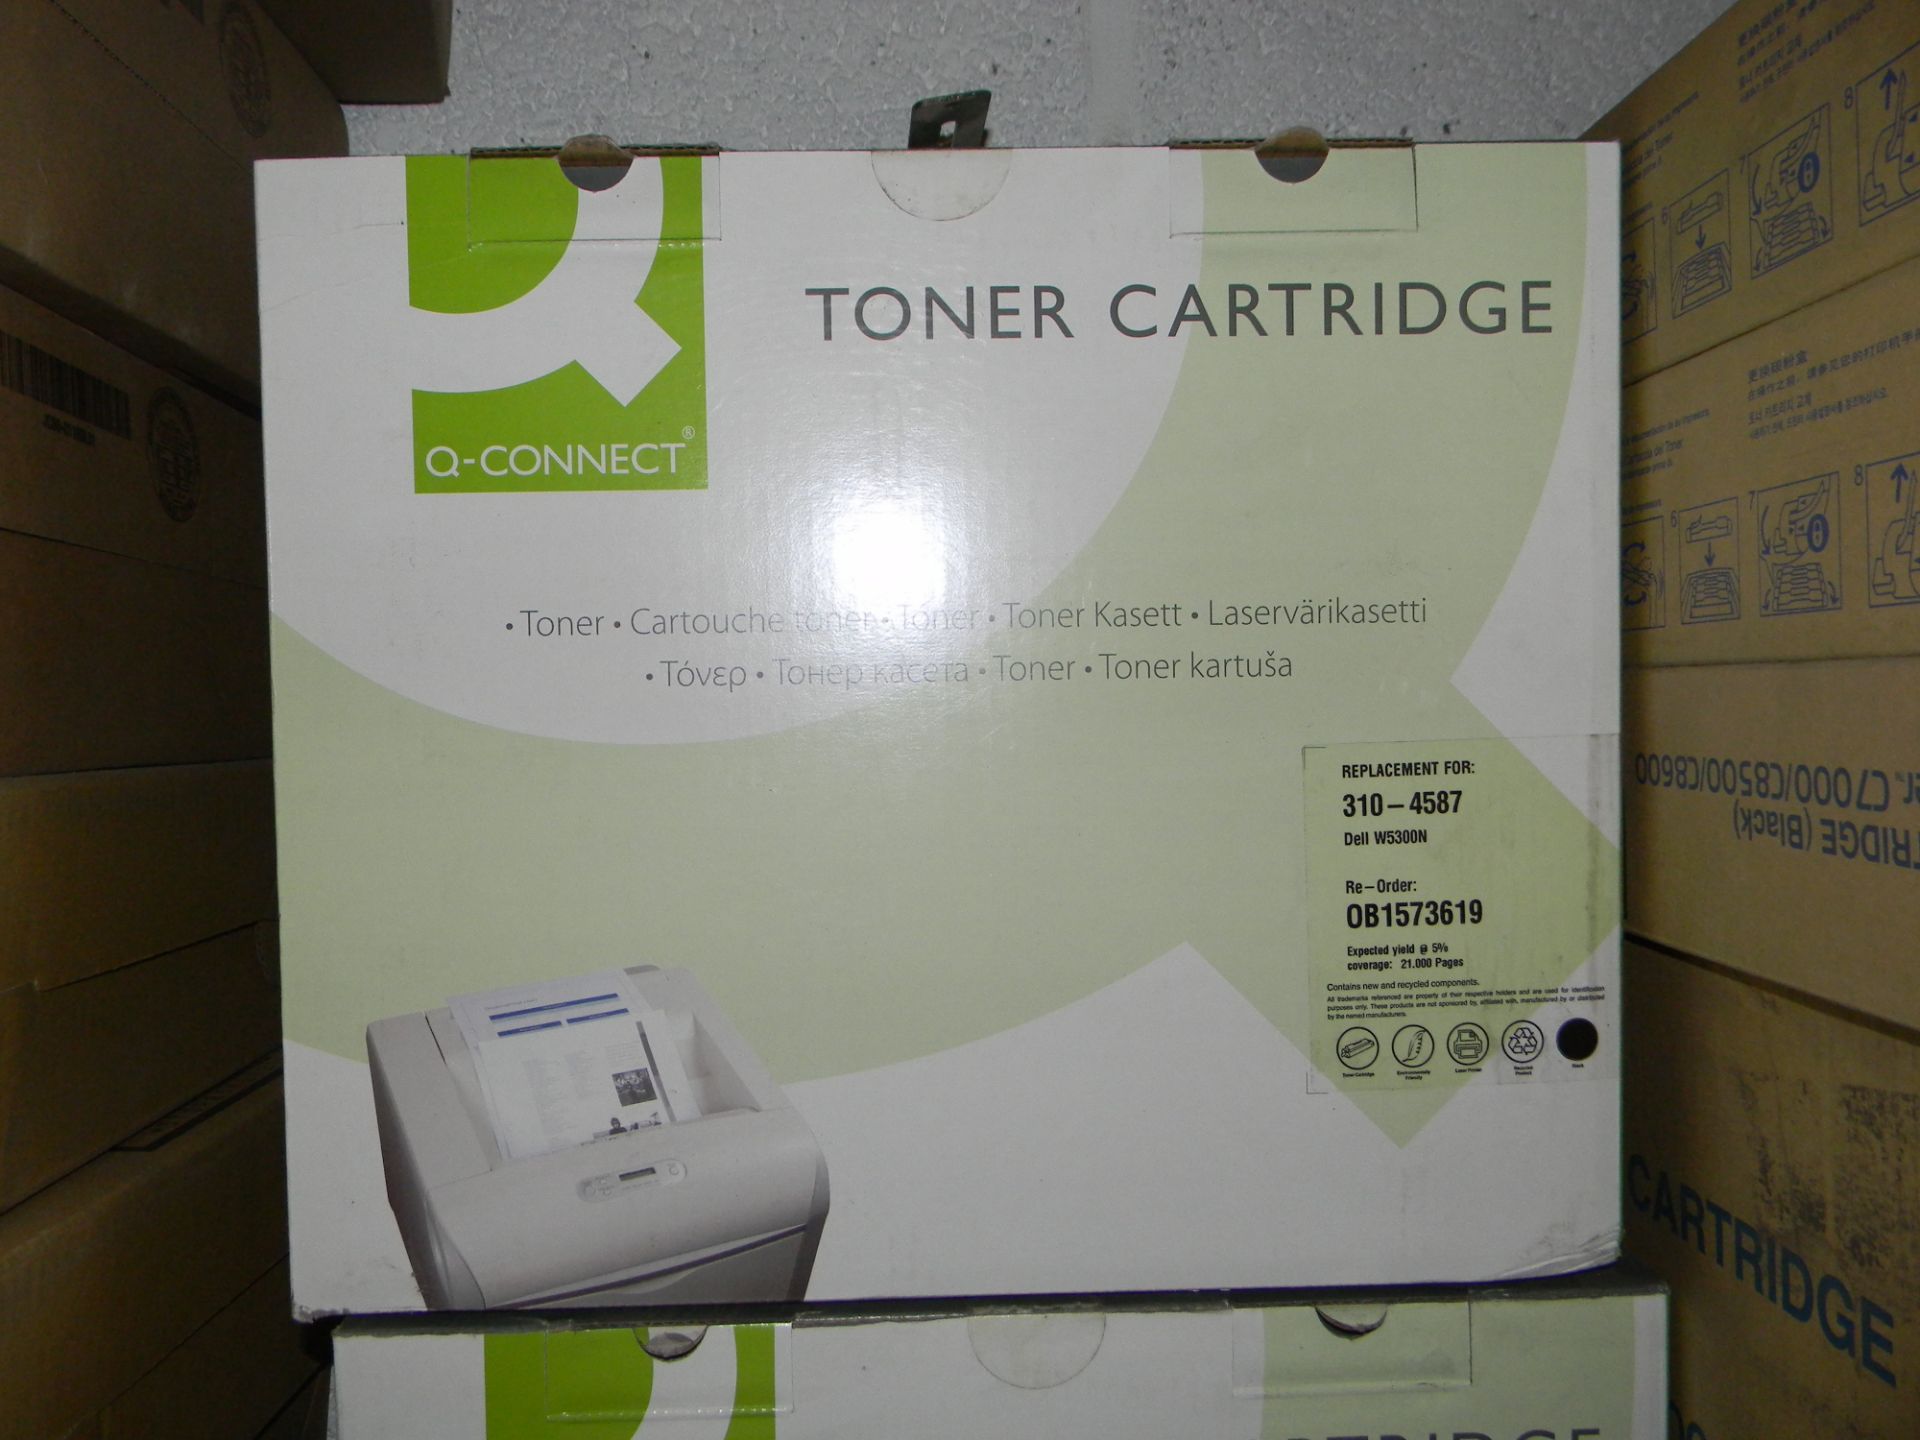 2 x Q-Connect Compatible Black Toner Cartridge for Dell W5300N